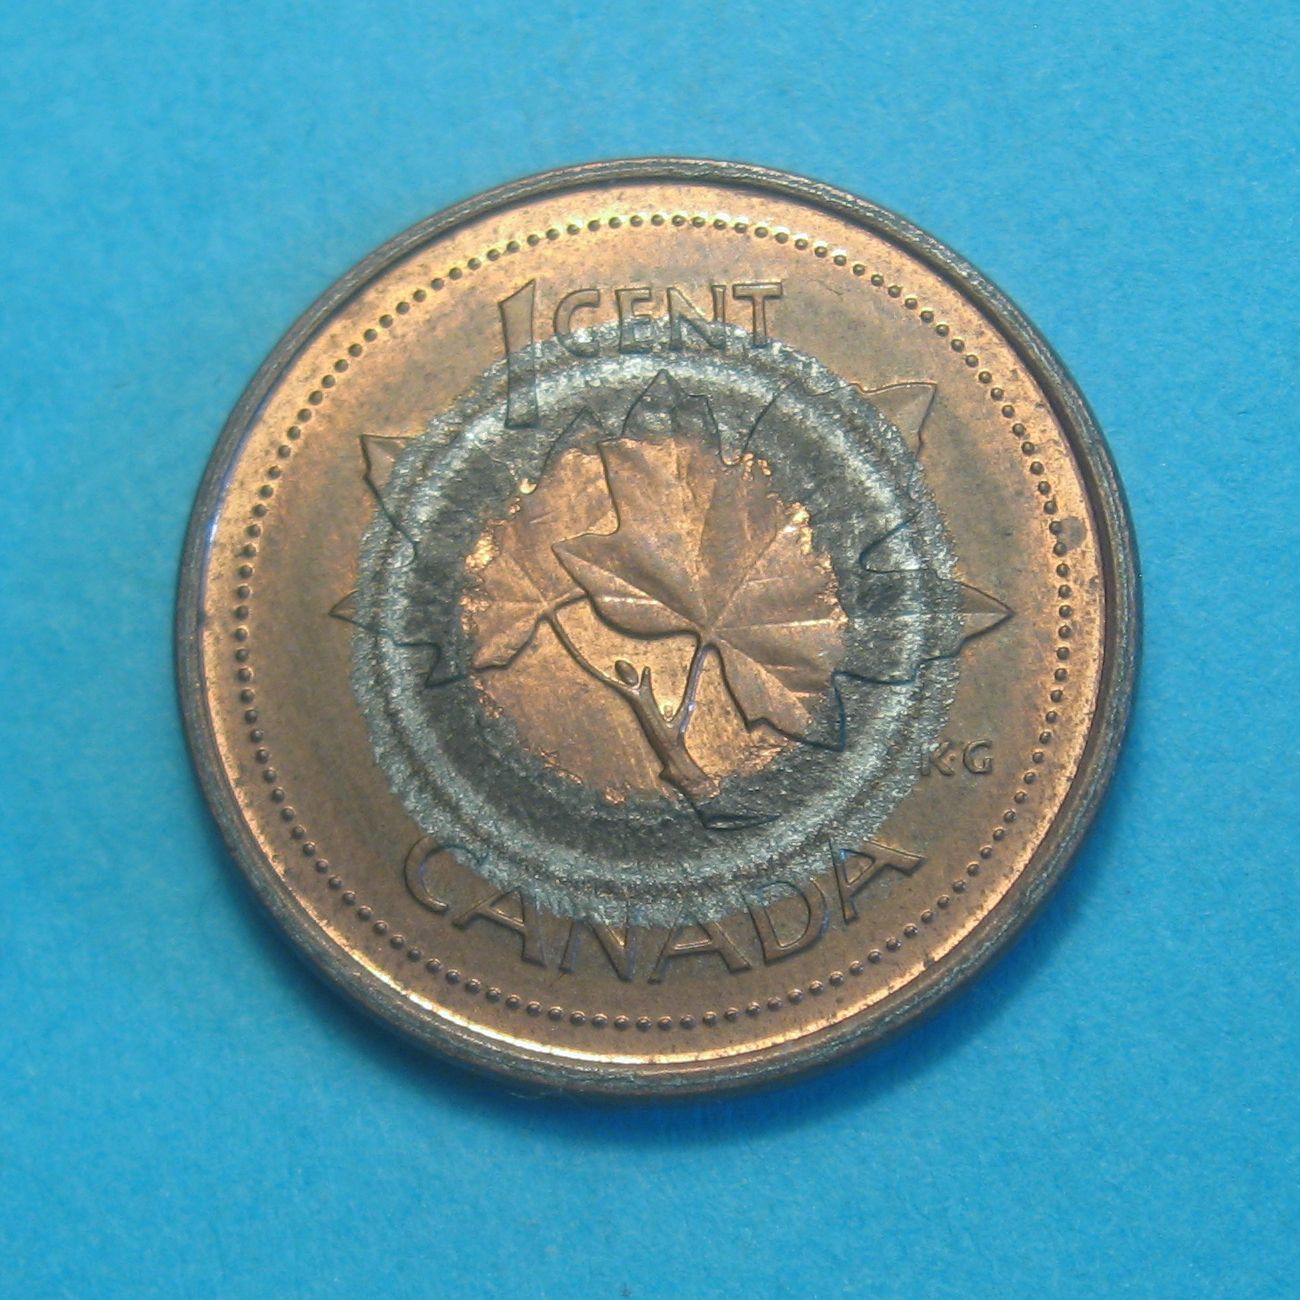 1-cent-2002-can-cible-revers.jpg